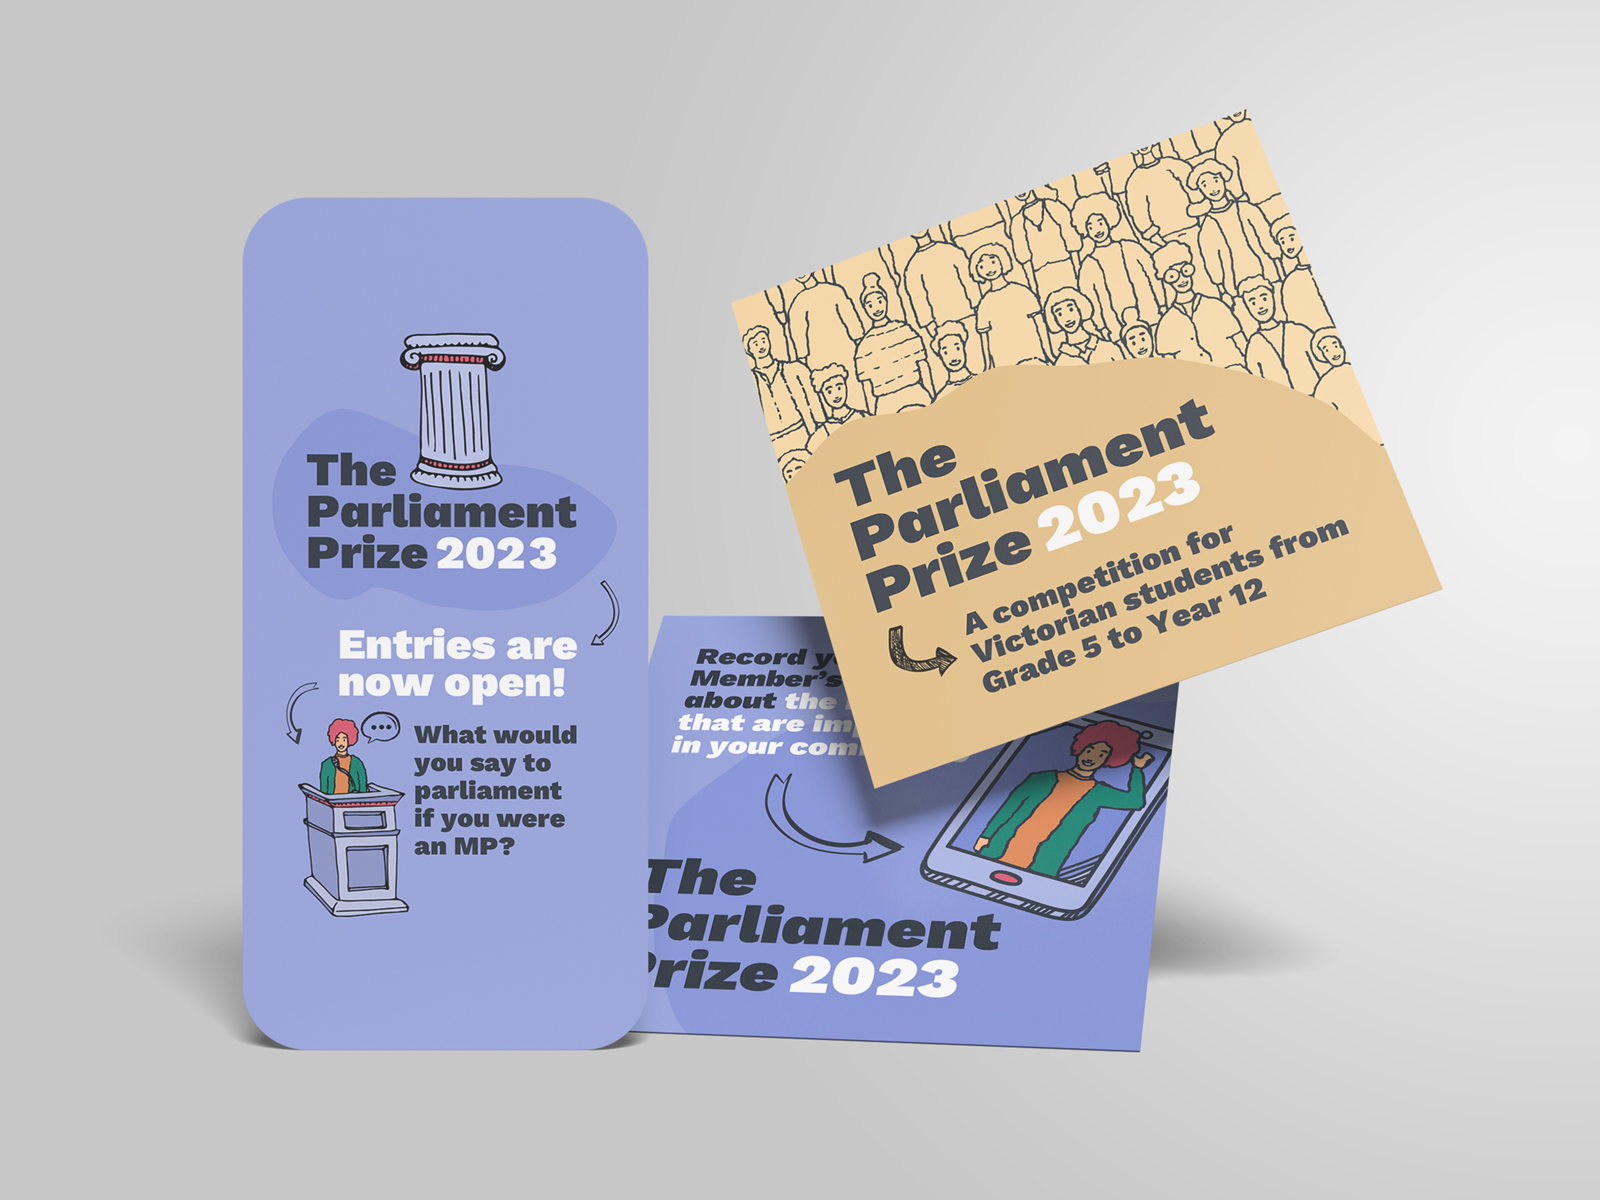 Social media mockup of content that is available to promote the Parliament Prize.